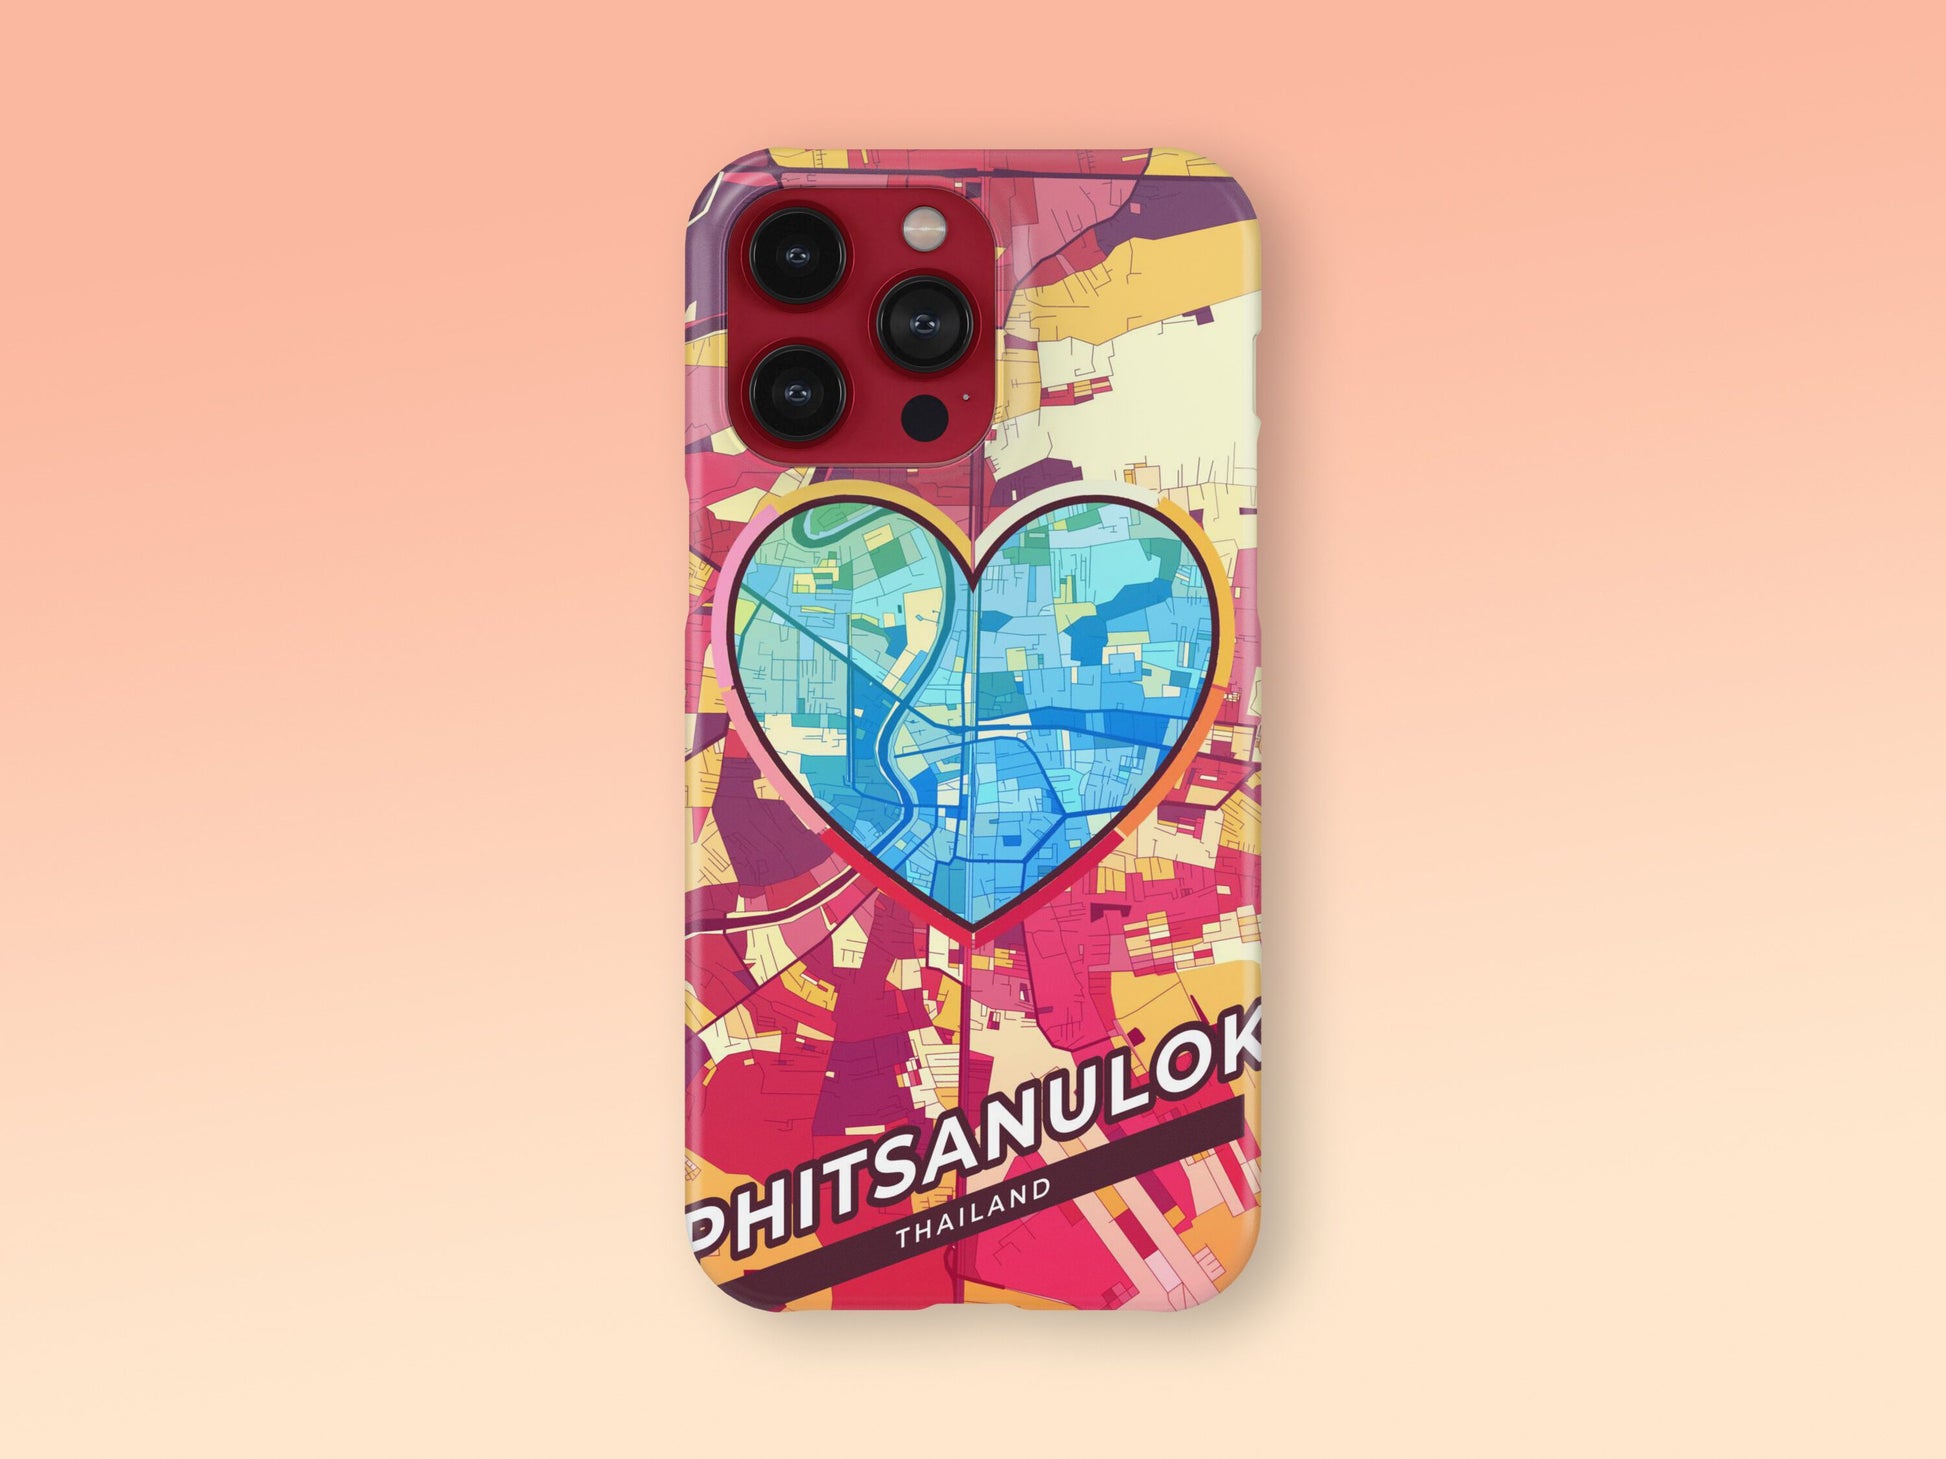 Phitsanulok Thailand slim phone case with colorful icon 2